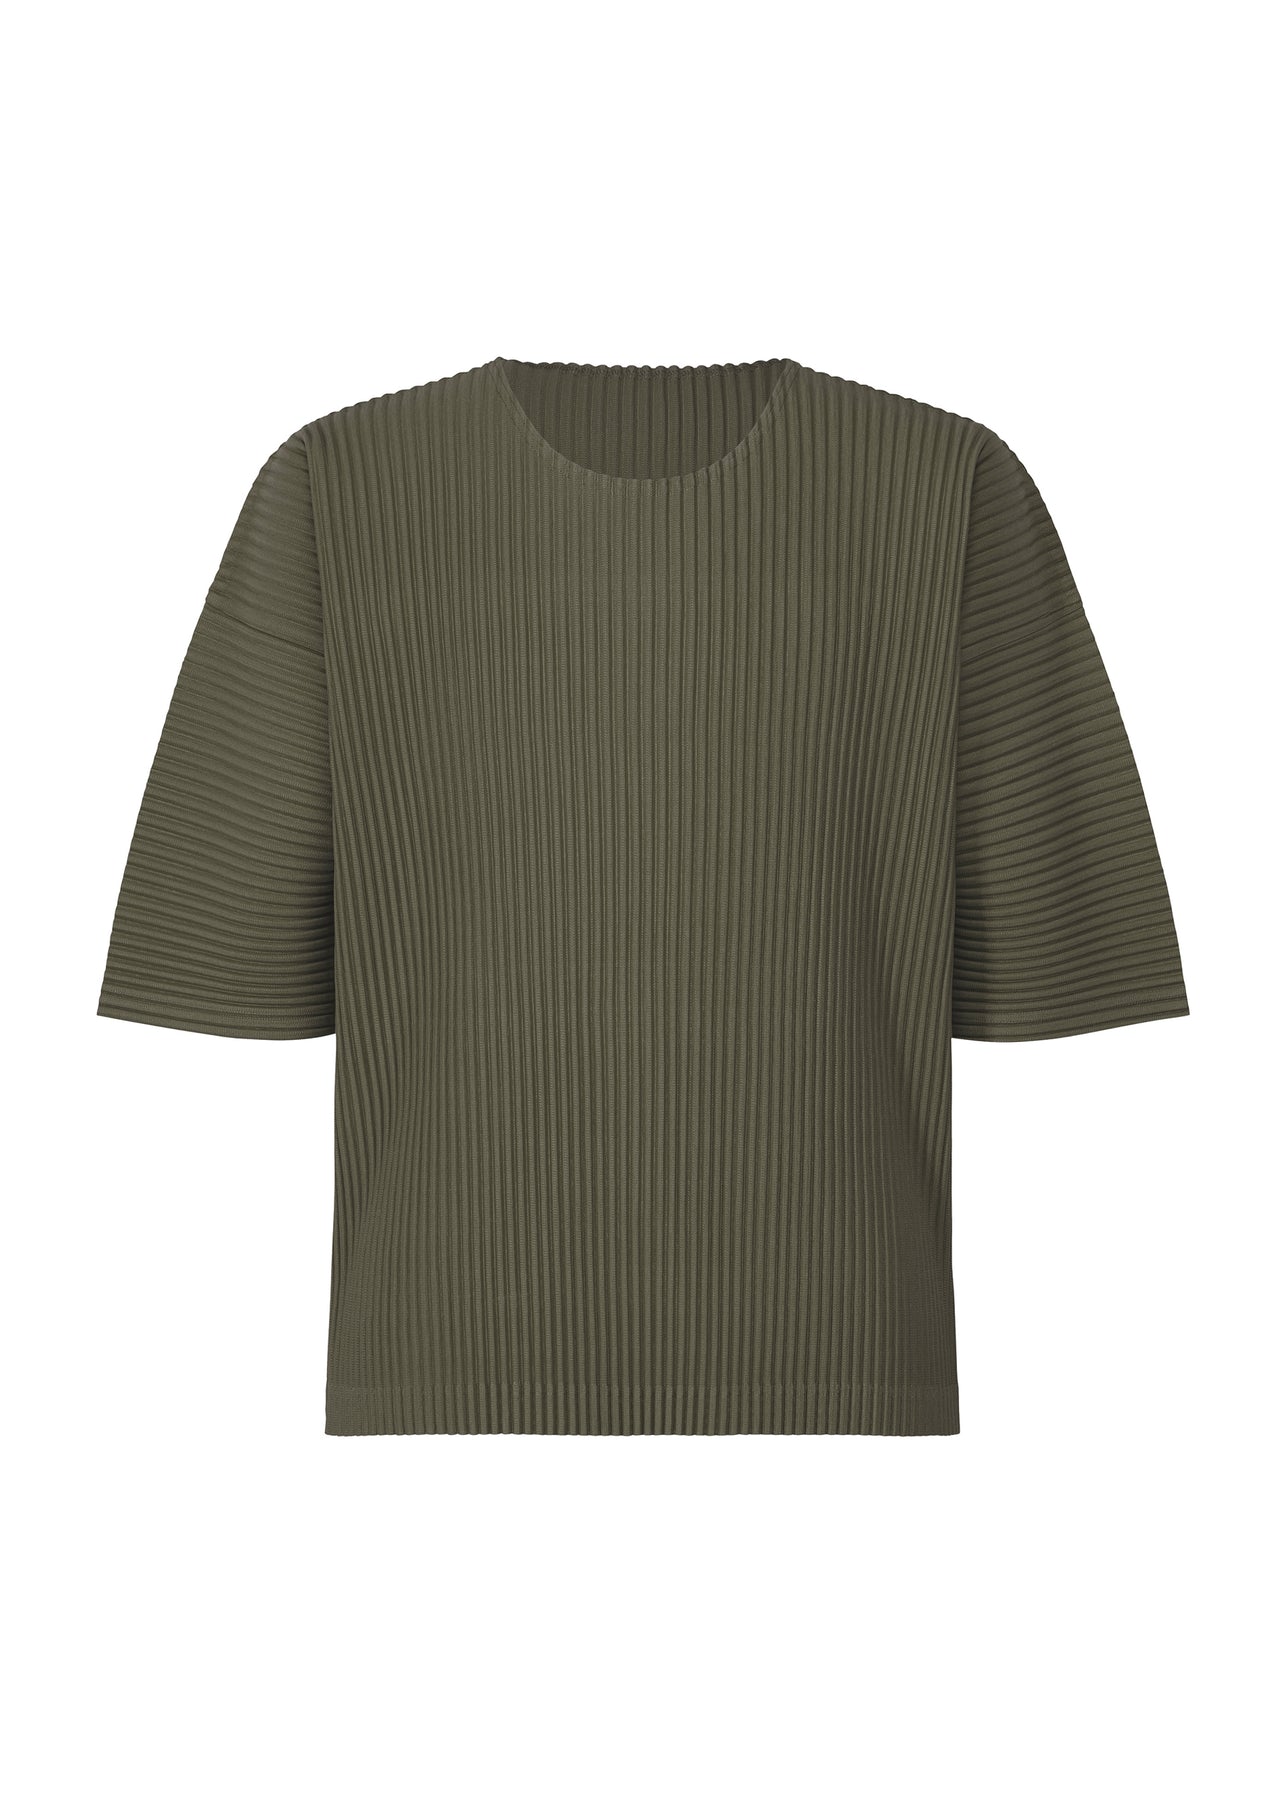 MC JULY T-SHIRT | The official ISSEY MIYAKE ONLINE STORE | ISSEY 